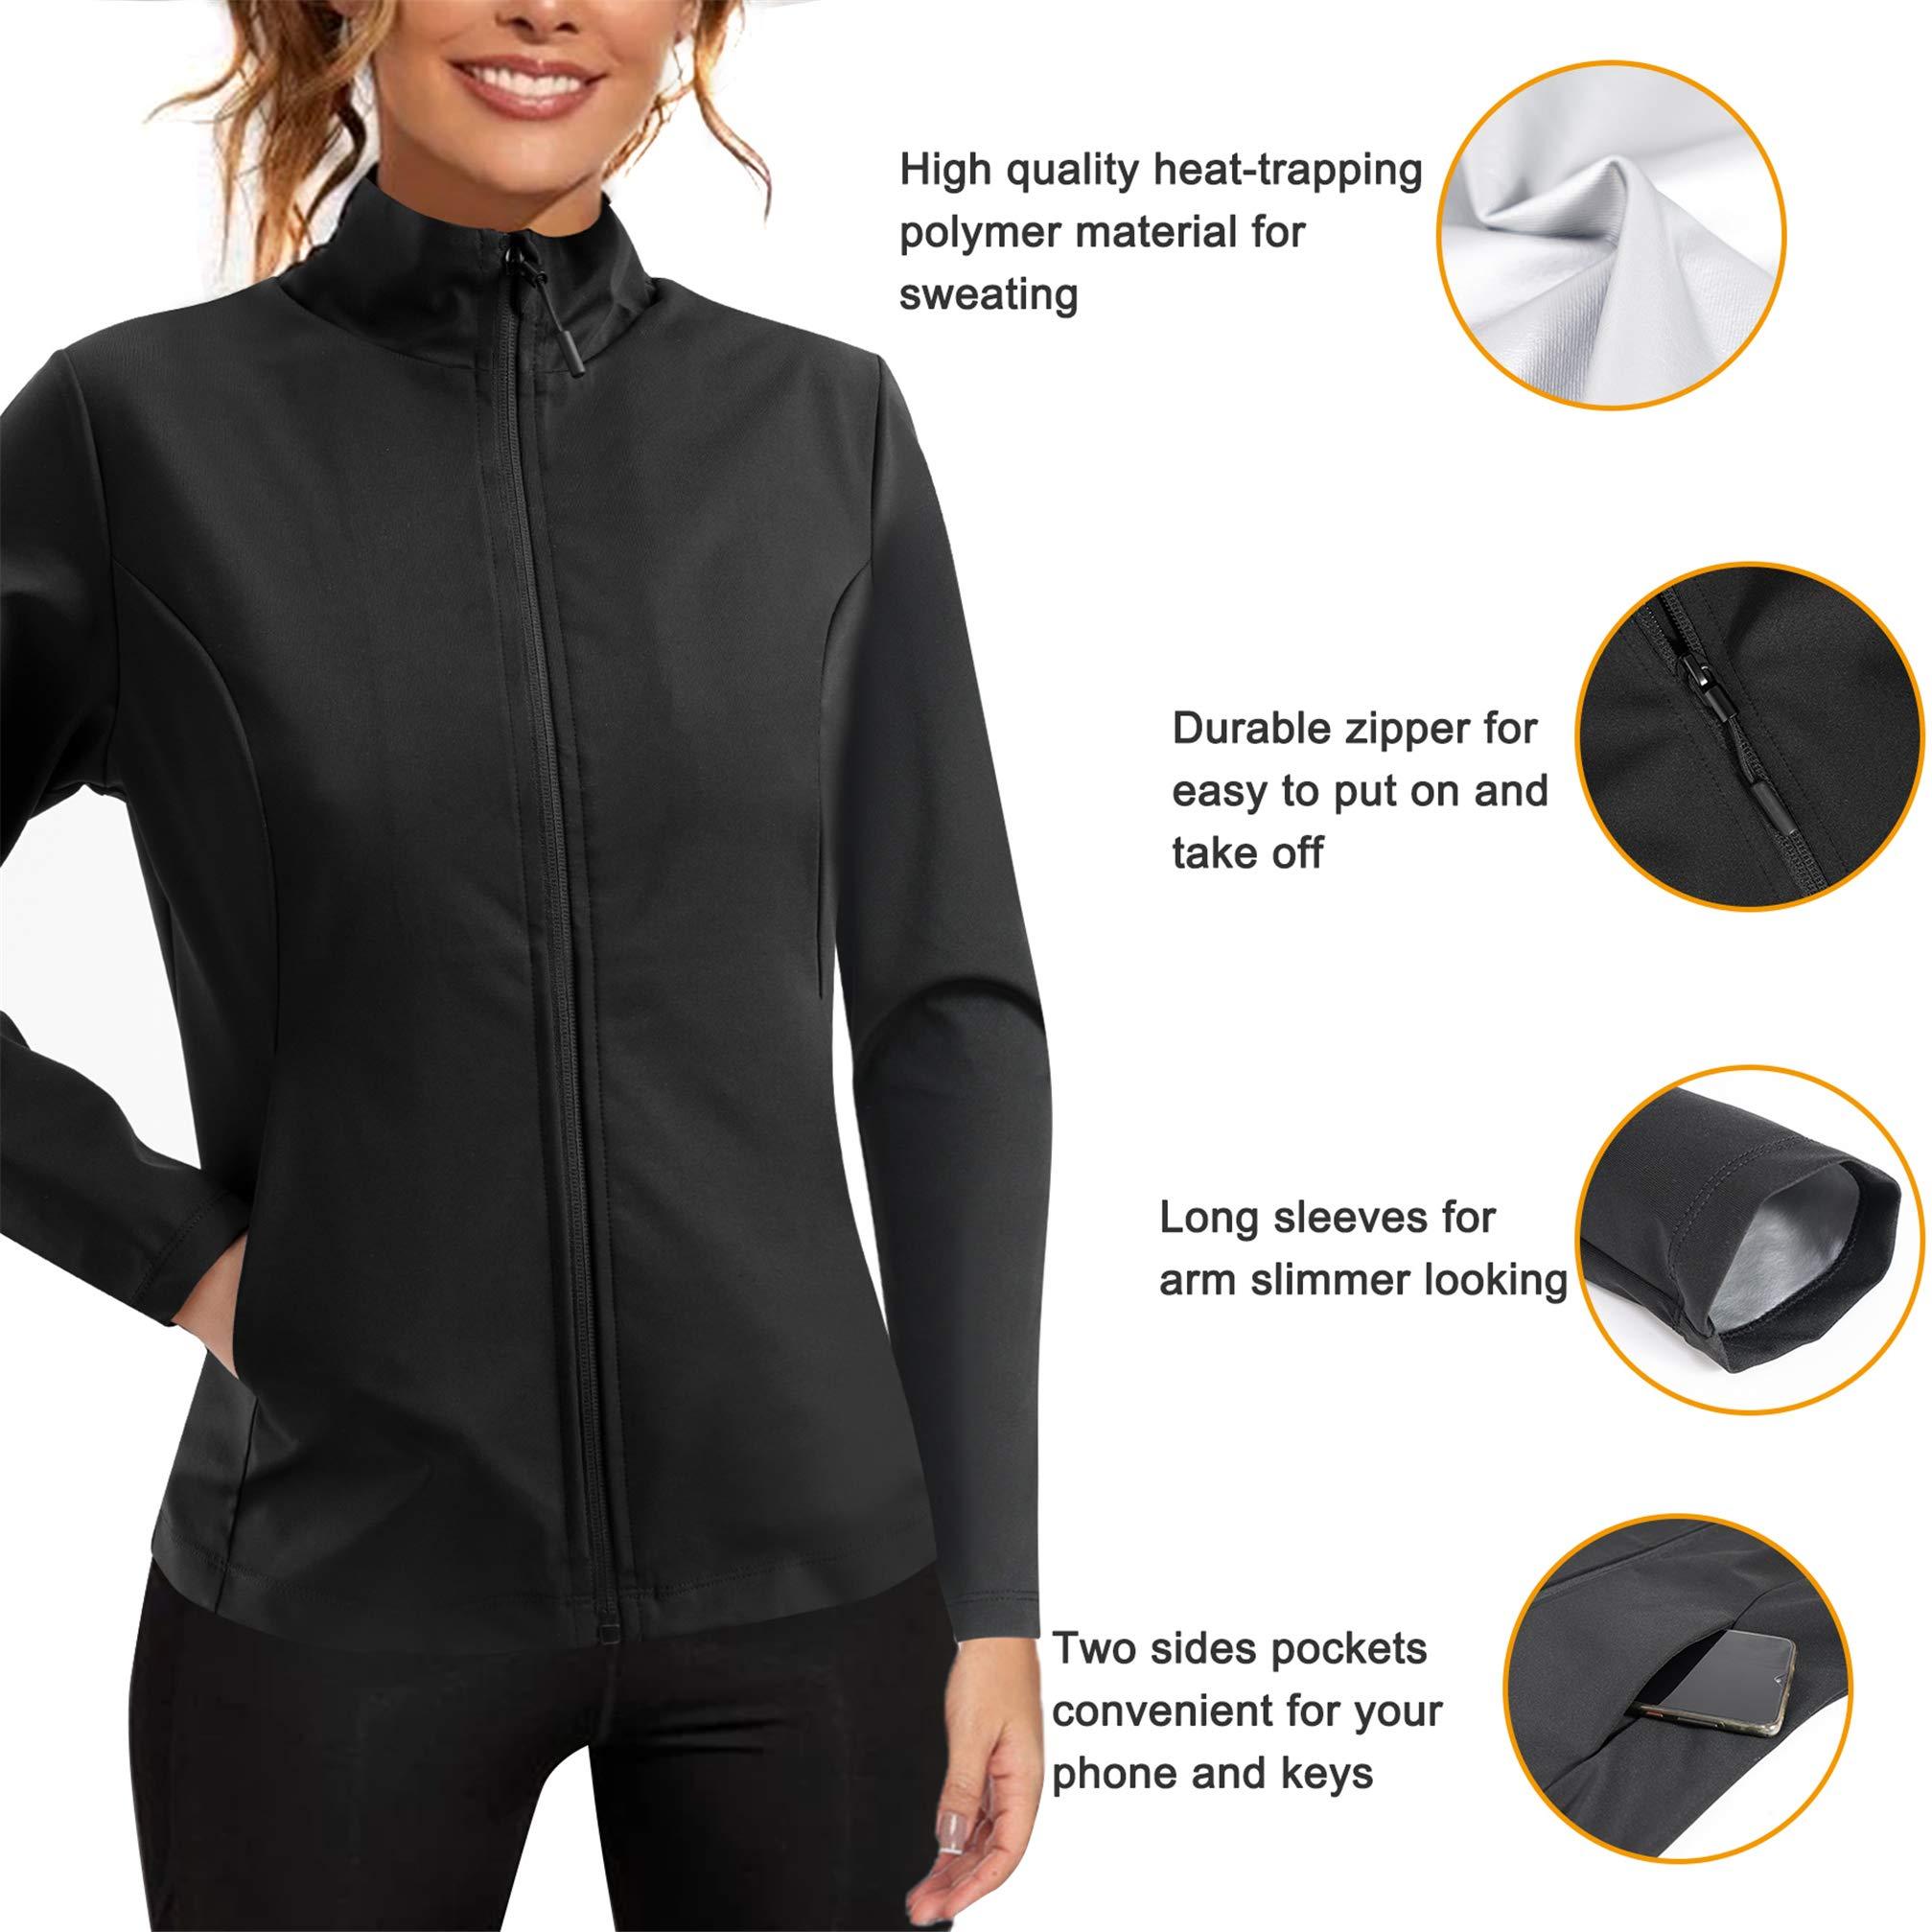 Chumian Women Hot Sweat Sauna Suit Track Jackets Workout Long Sleeve Tank Tops with Zipper Slimming Polymer Waist Trainer (Black, S) 2